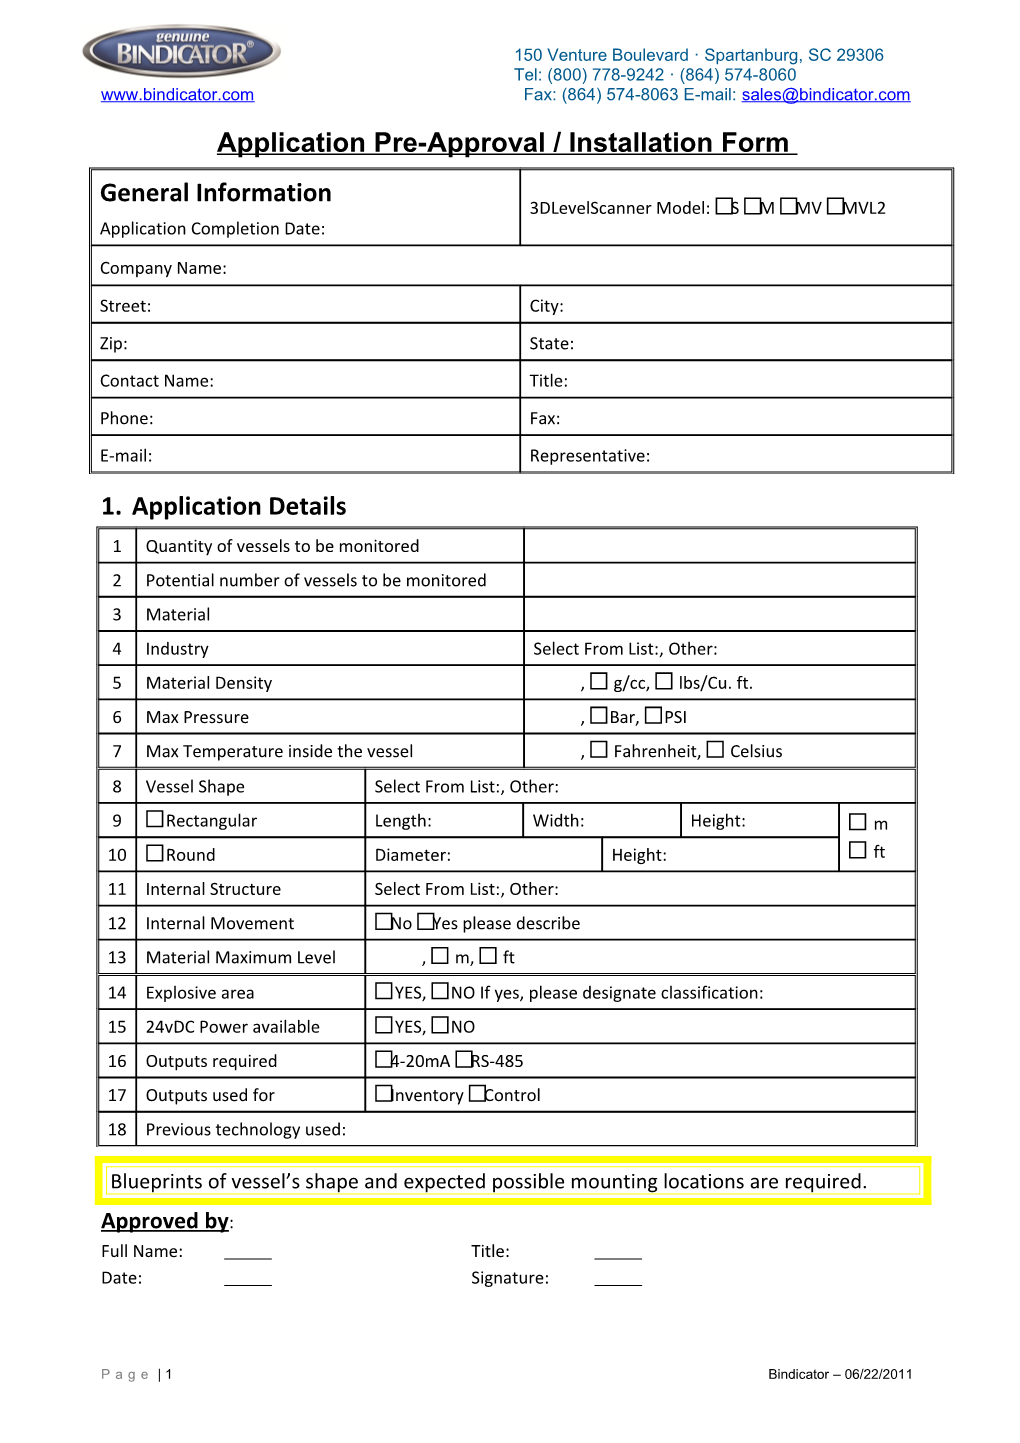 Application Pre-Approval / Installation Form